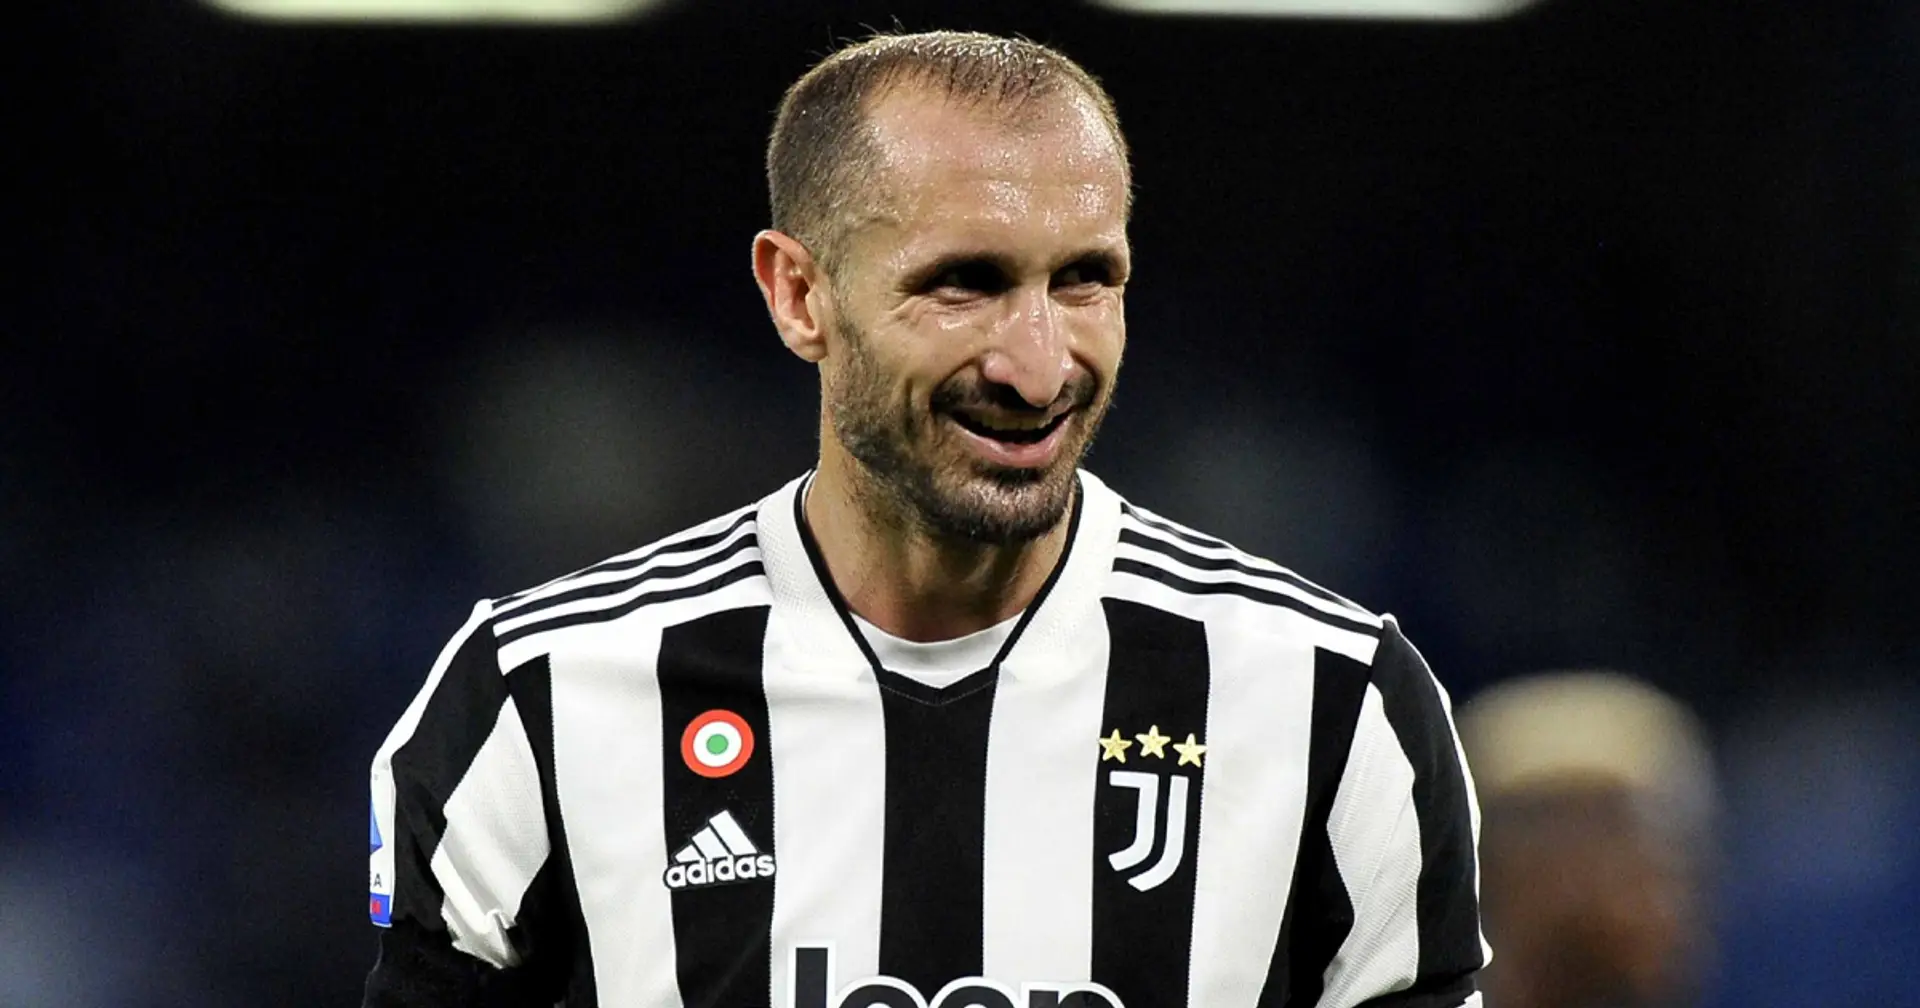 Giorgio Chiellini 'considering' MLS move after 17 seasons at Juventus